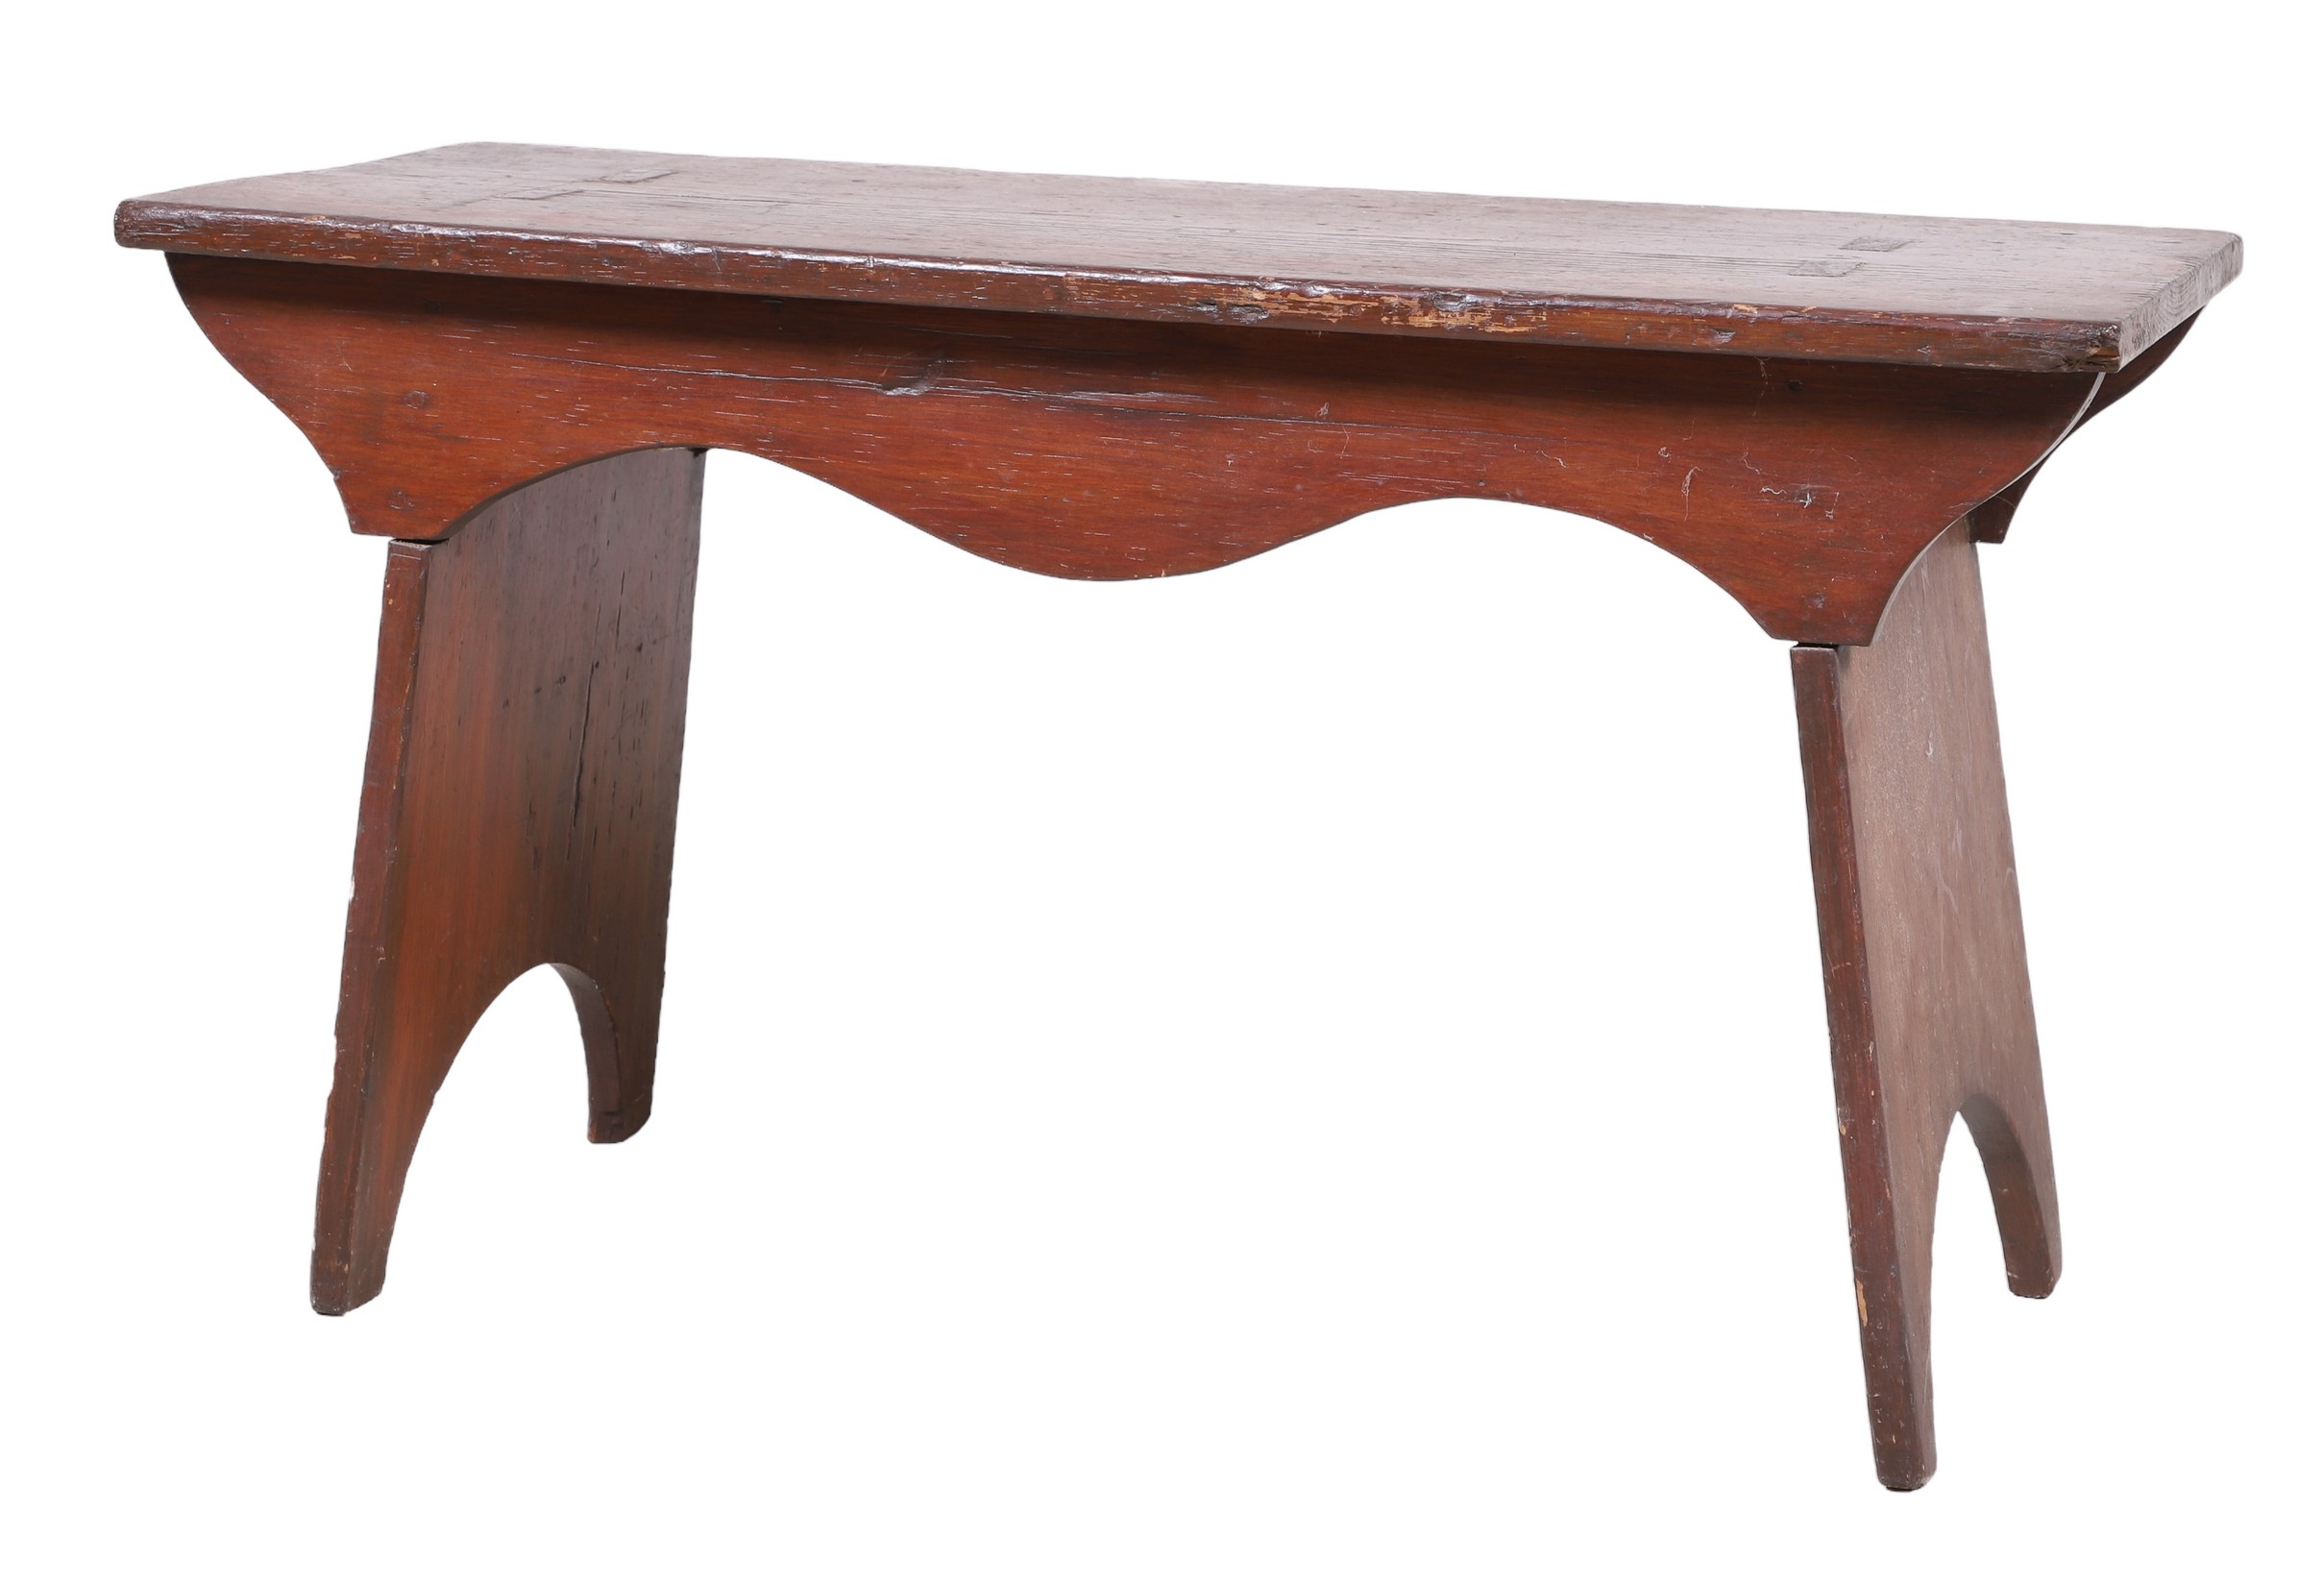 Pine scalloped water bench, scalloped